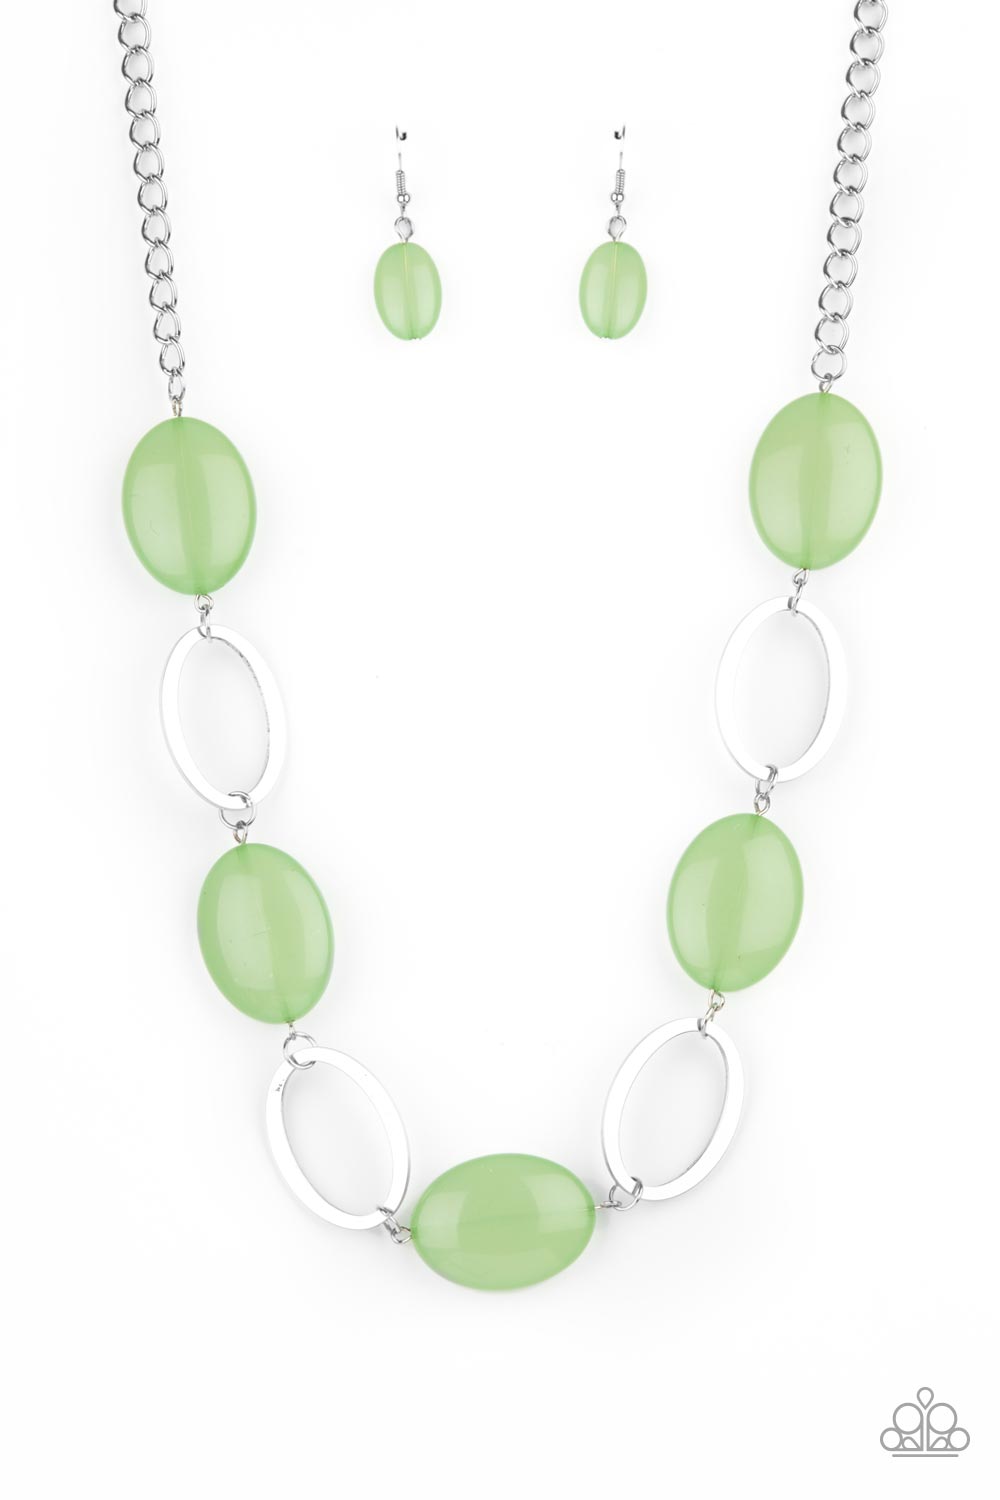 Beachside Boardwalk Green and Silver Necklace - Paparazzi Accessories- lightbox - CarasShop.com - $5 Jewelry by Cara Jewels